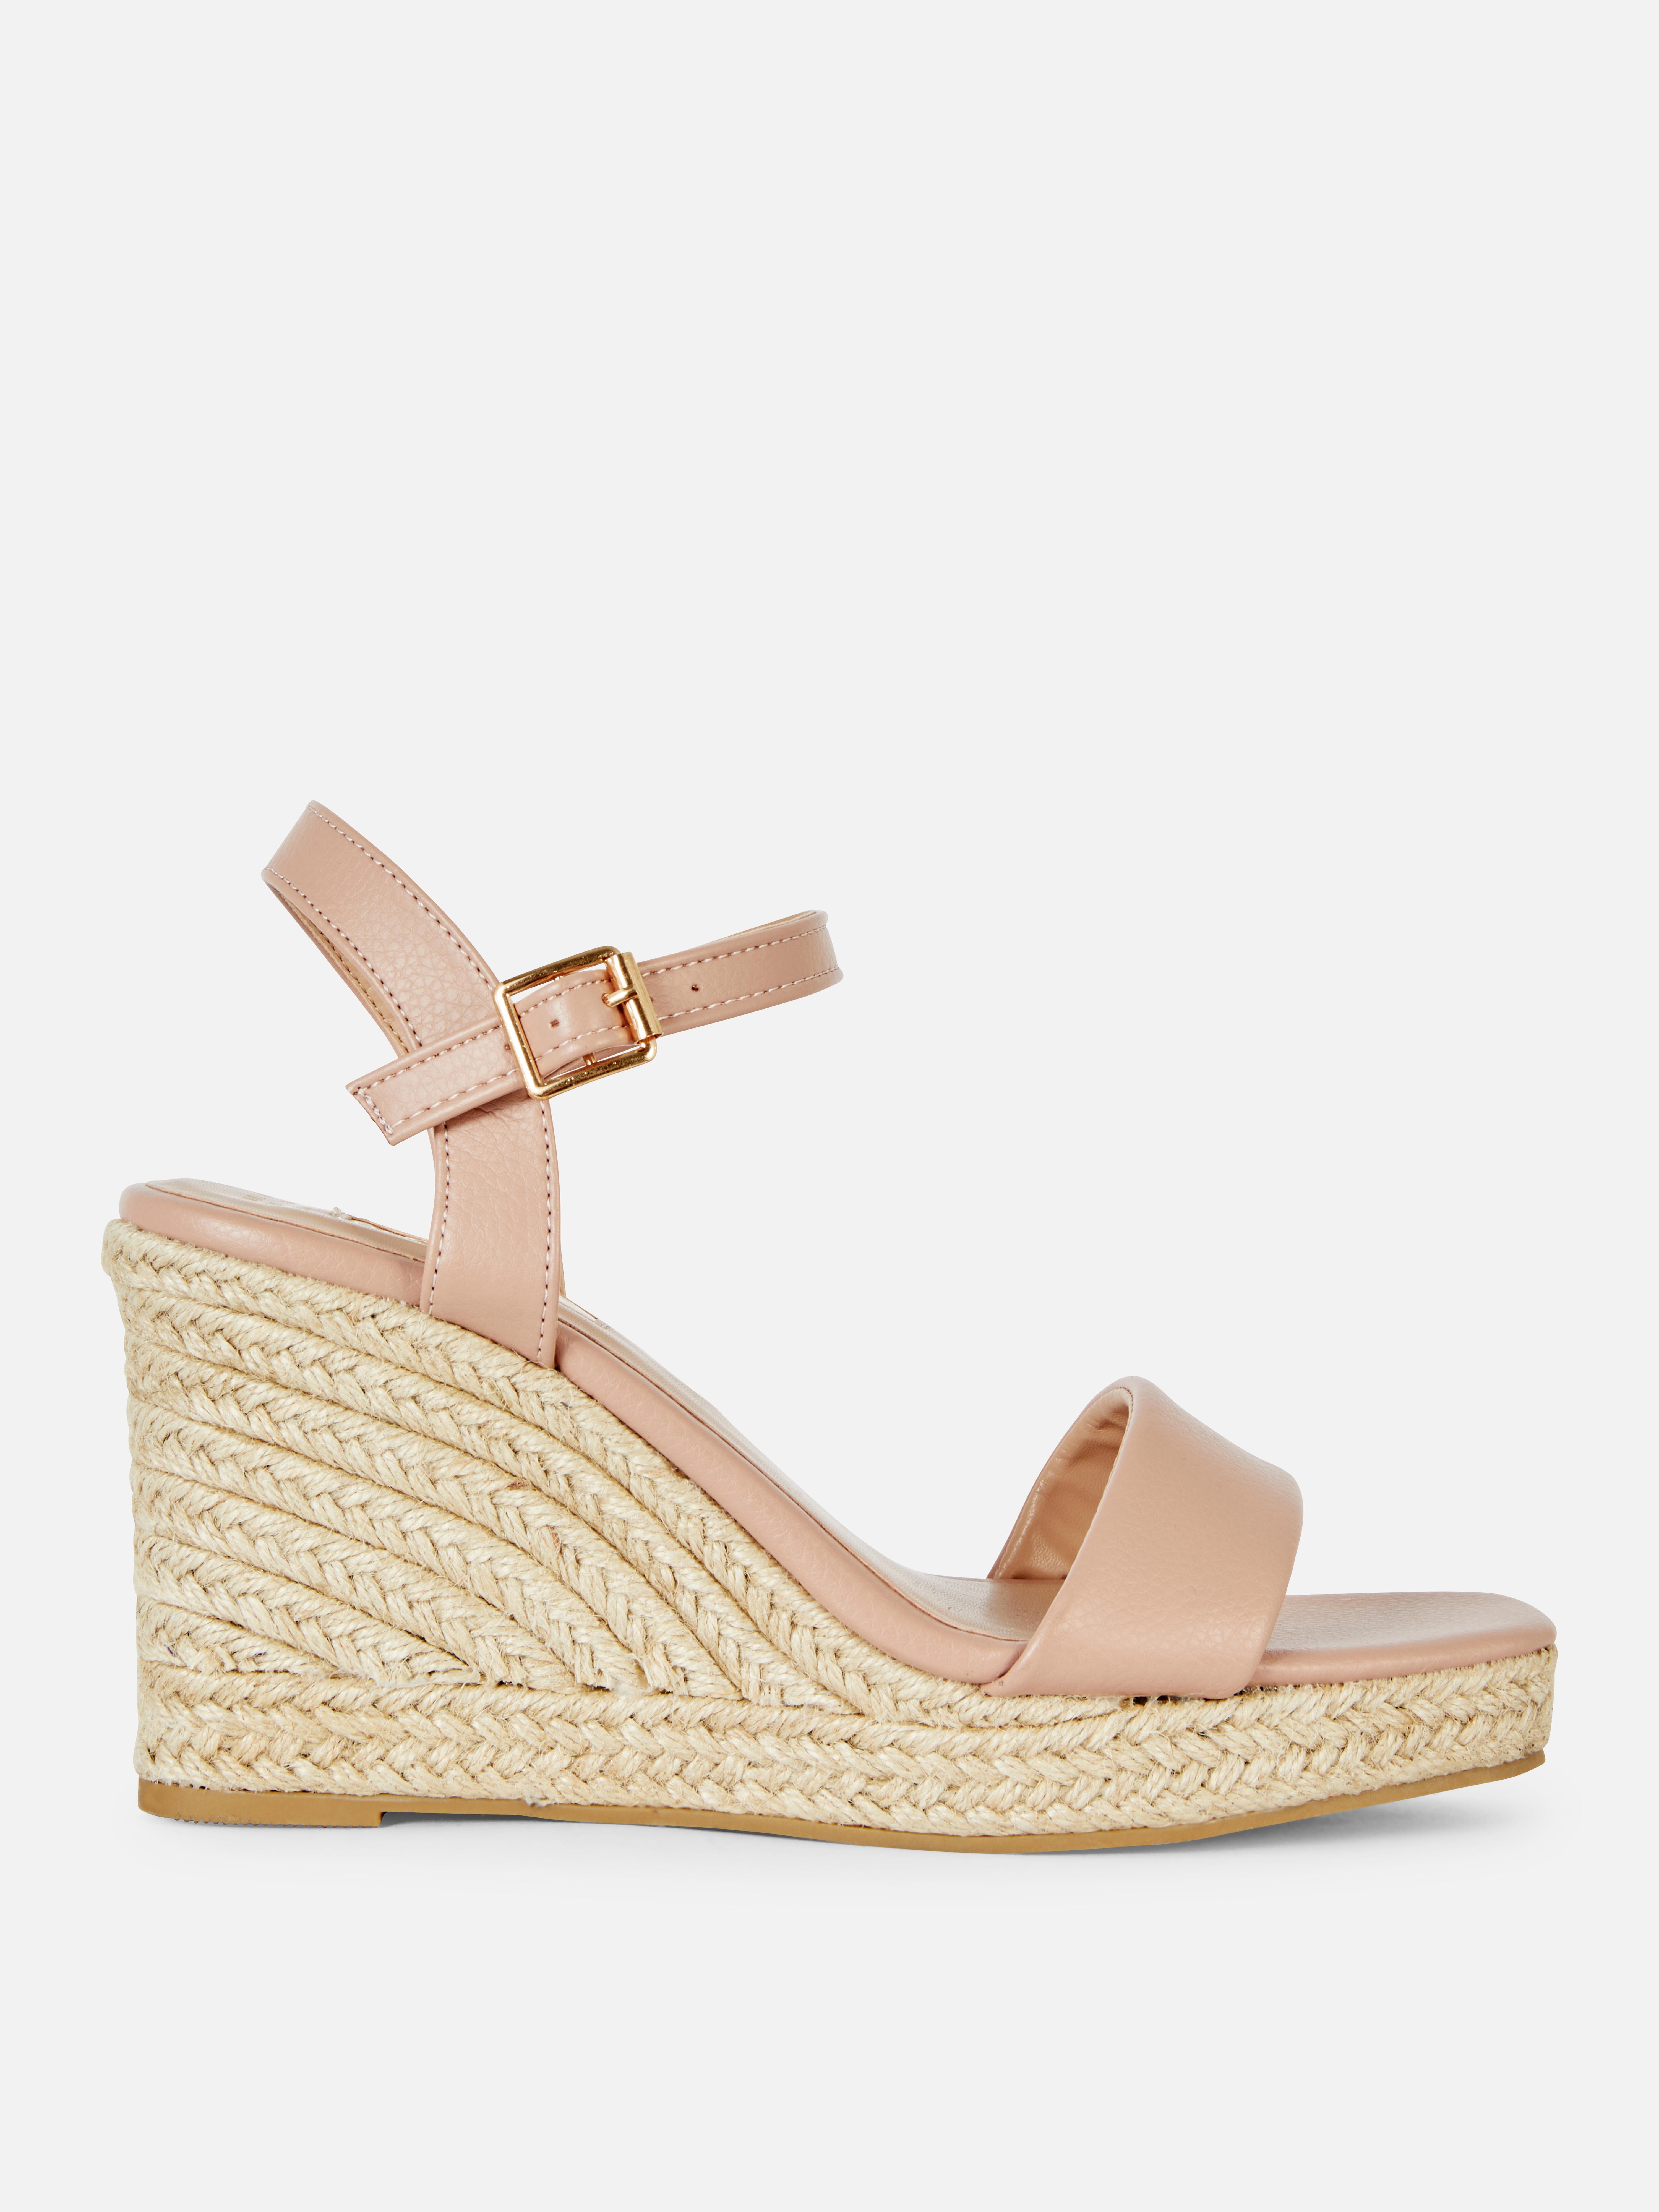 Toe Padded Strap Wedge Sandals